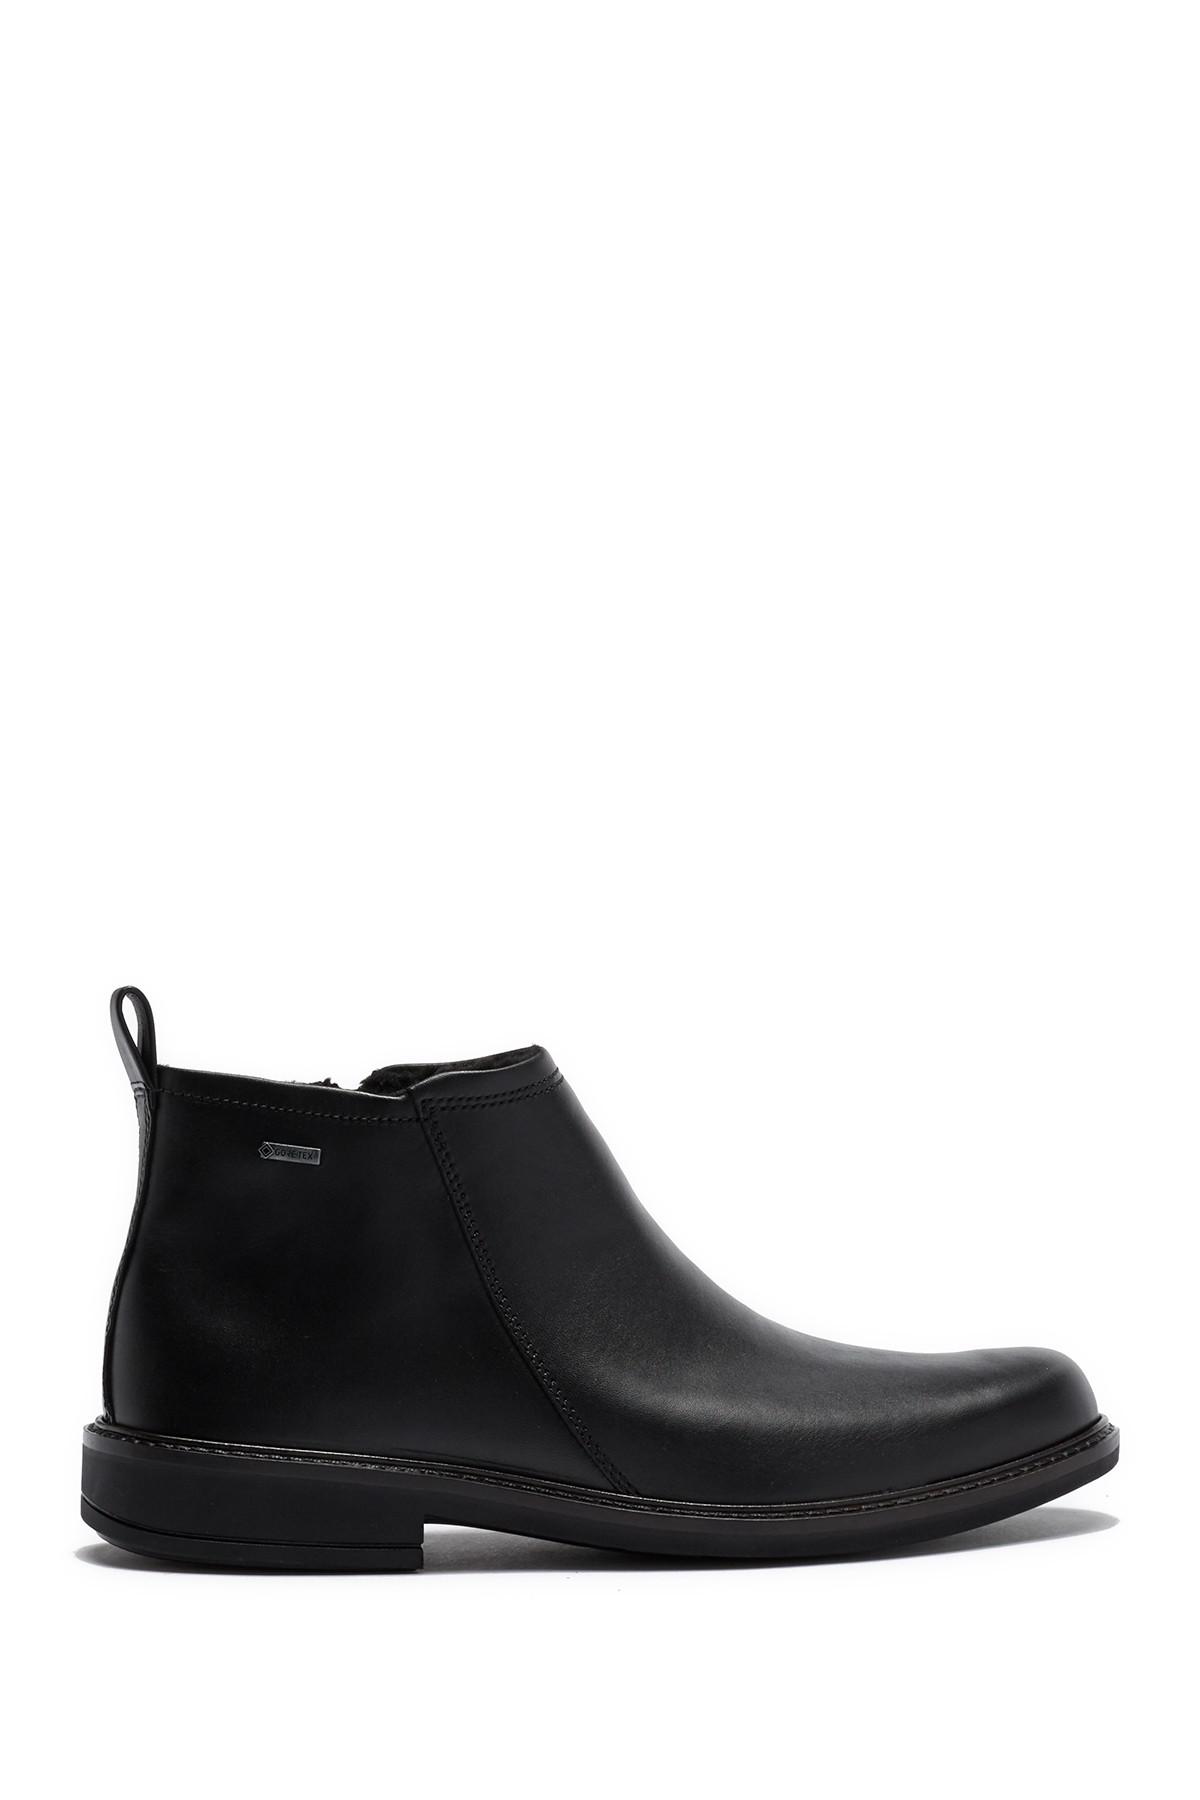 Ecco Holton Leather Boot in Black for Men - Lyst